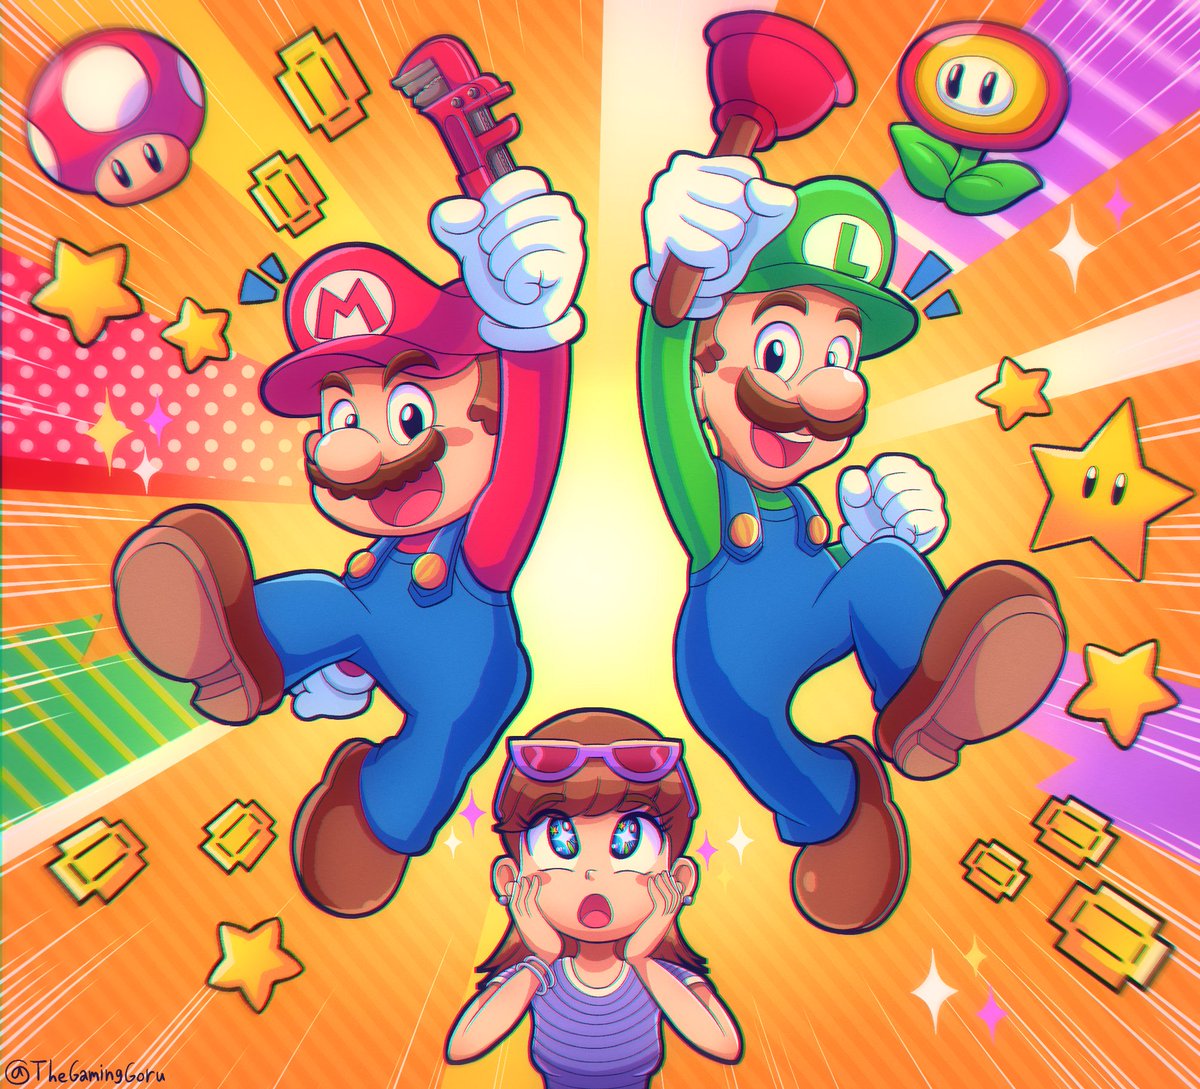 🌟 We’re the Mario Brothers! 
…and plumbing’s our game! 🌟

// #SuperMarioBrosMovie #MarioMovie  #SuperMarioMovie  #MarioBrosMovie #MarioFanart #Fanart #スーパーマリオブラザーズ #Nintendo